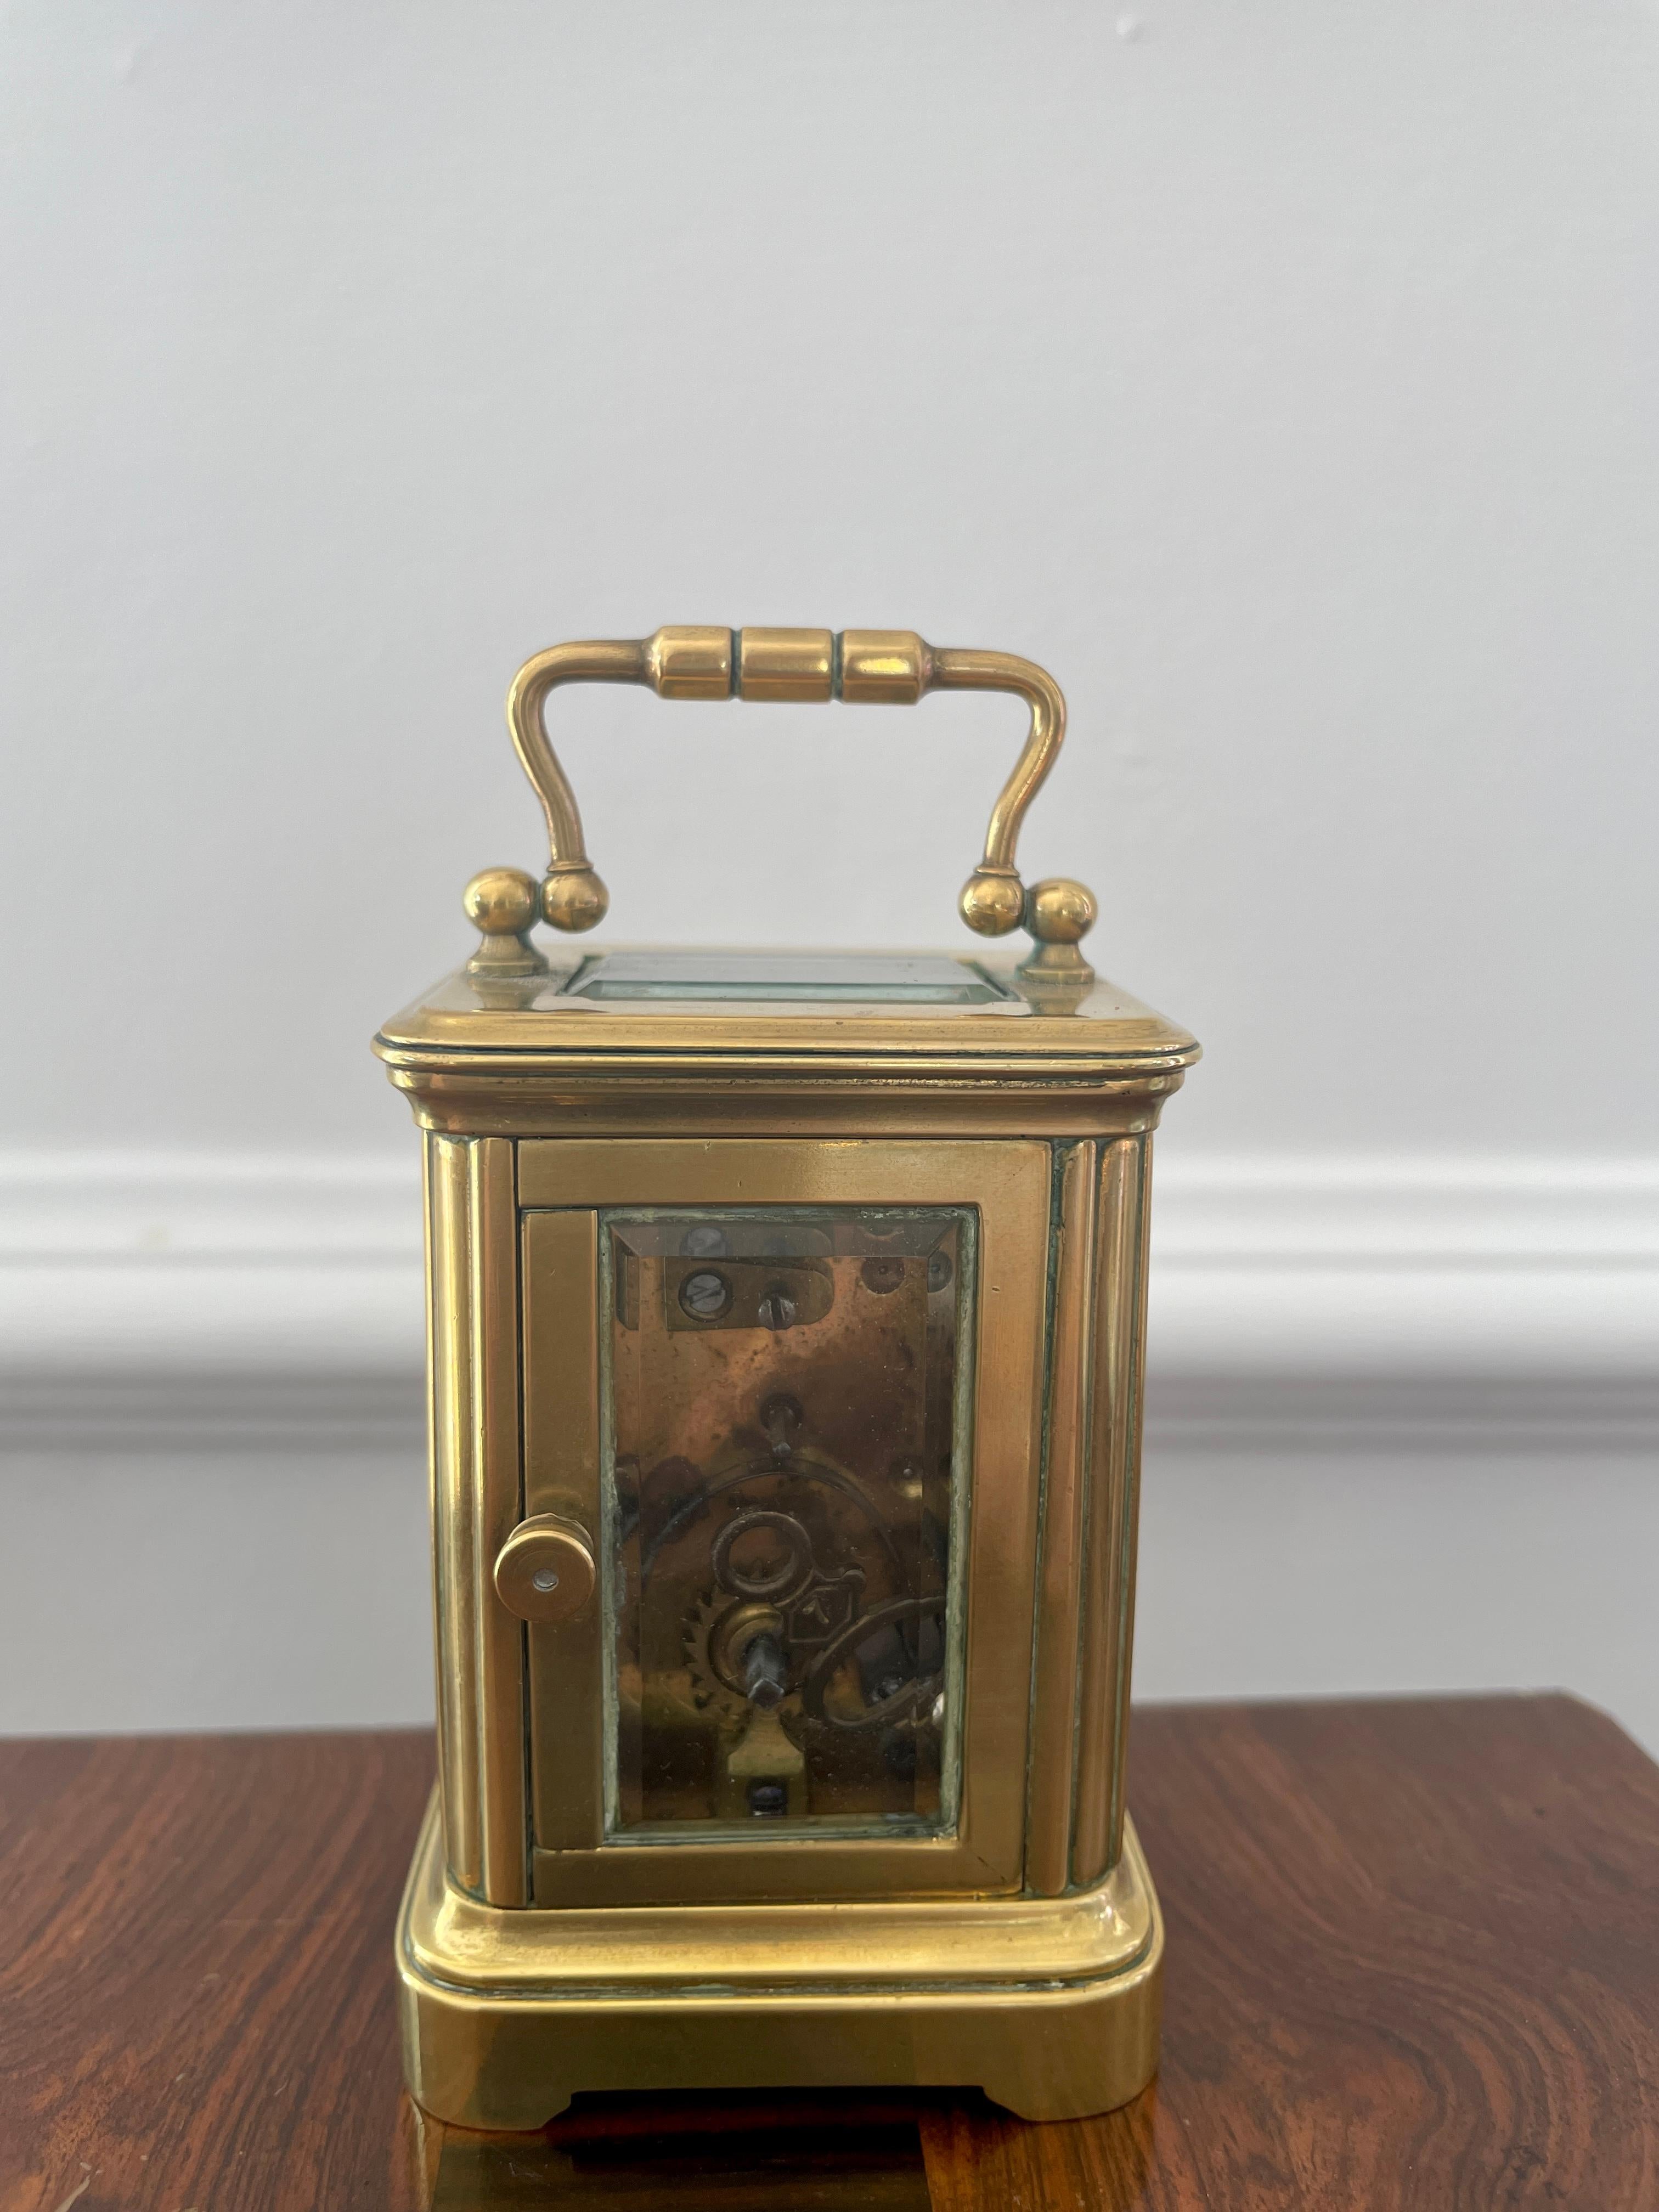 Charming Antique Lacquered Brass Cased Carriage Clock 1